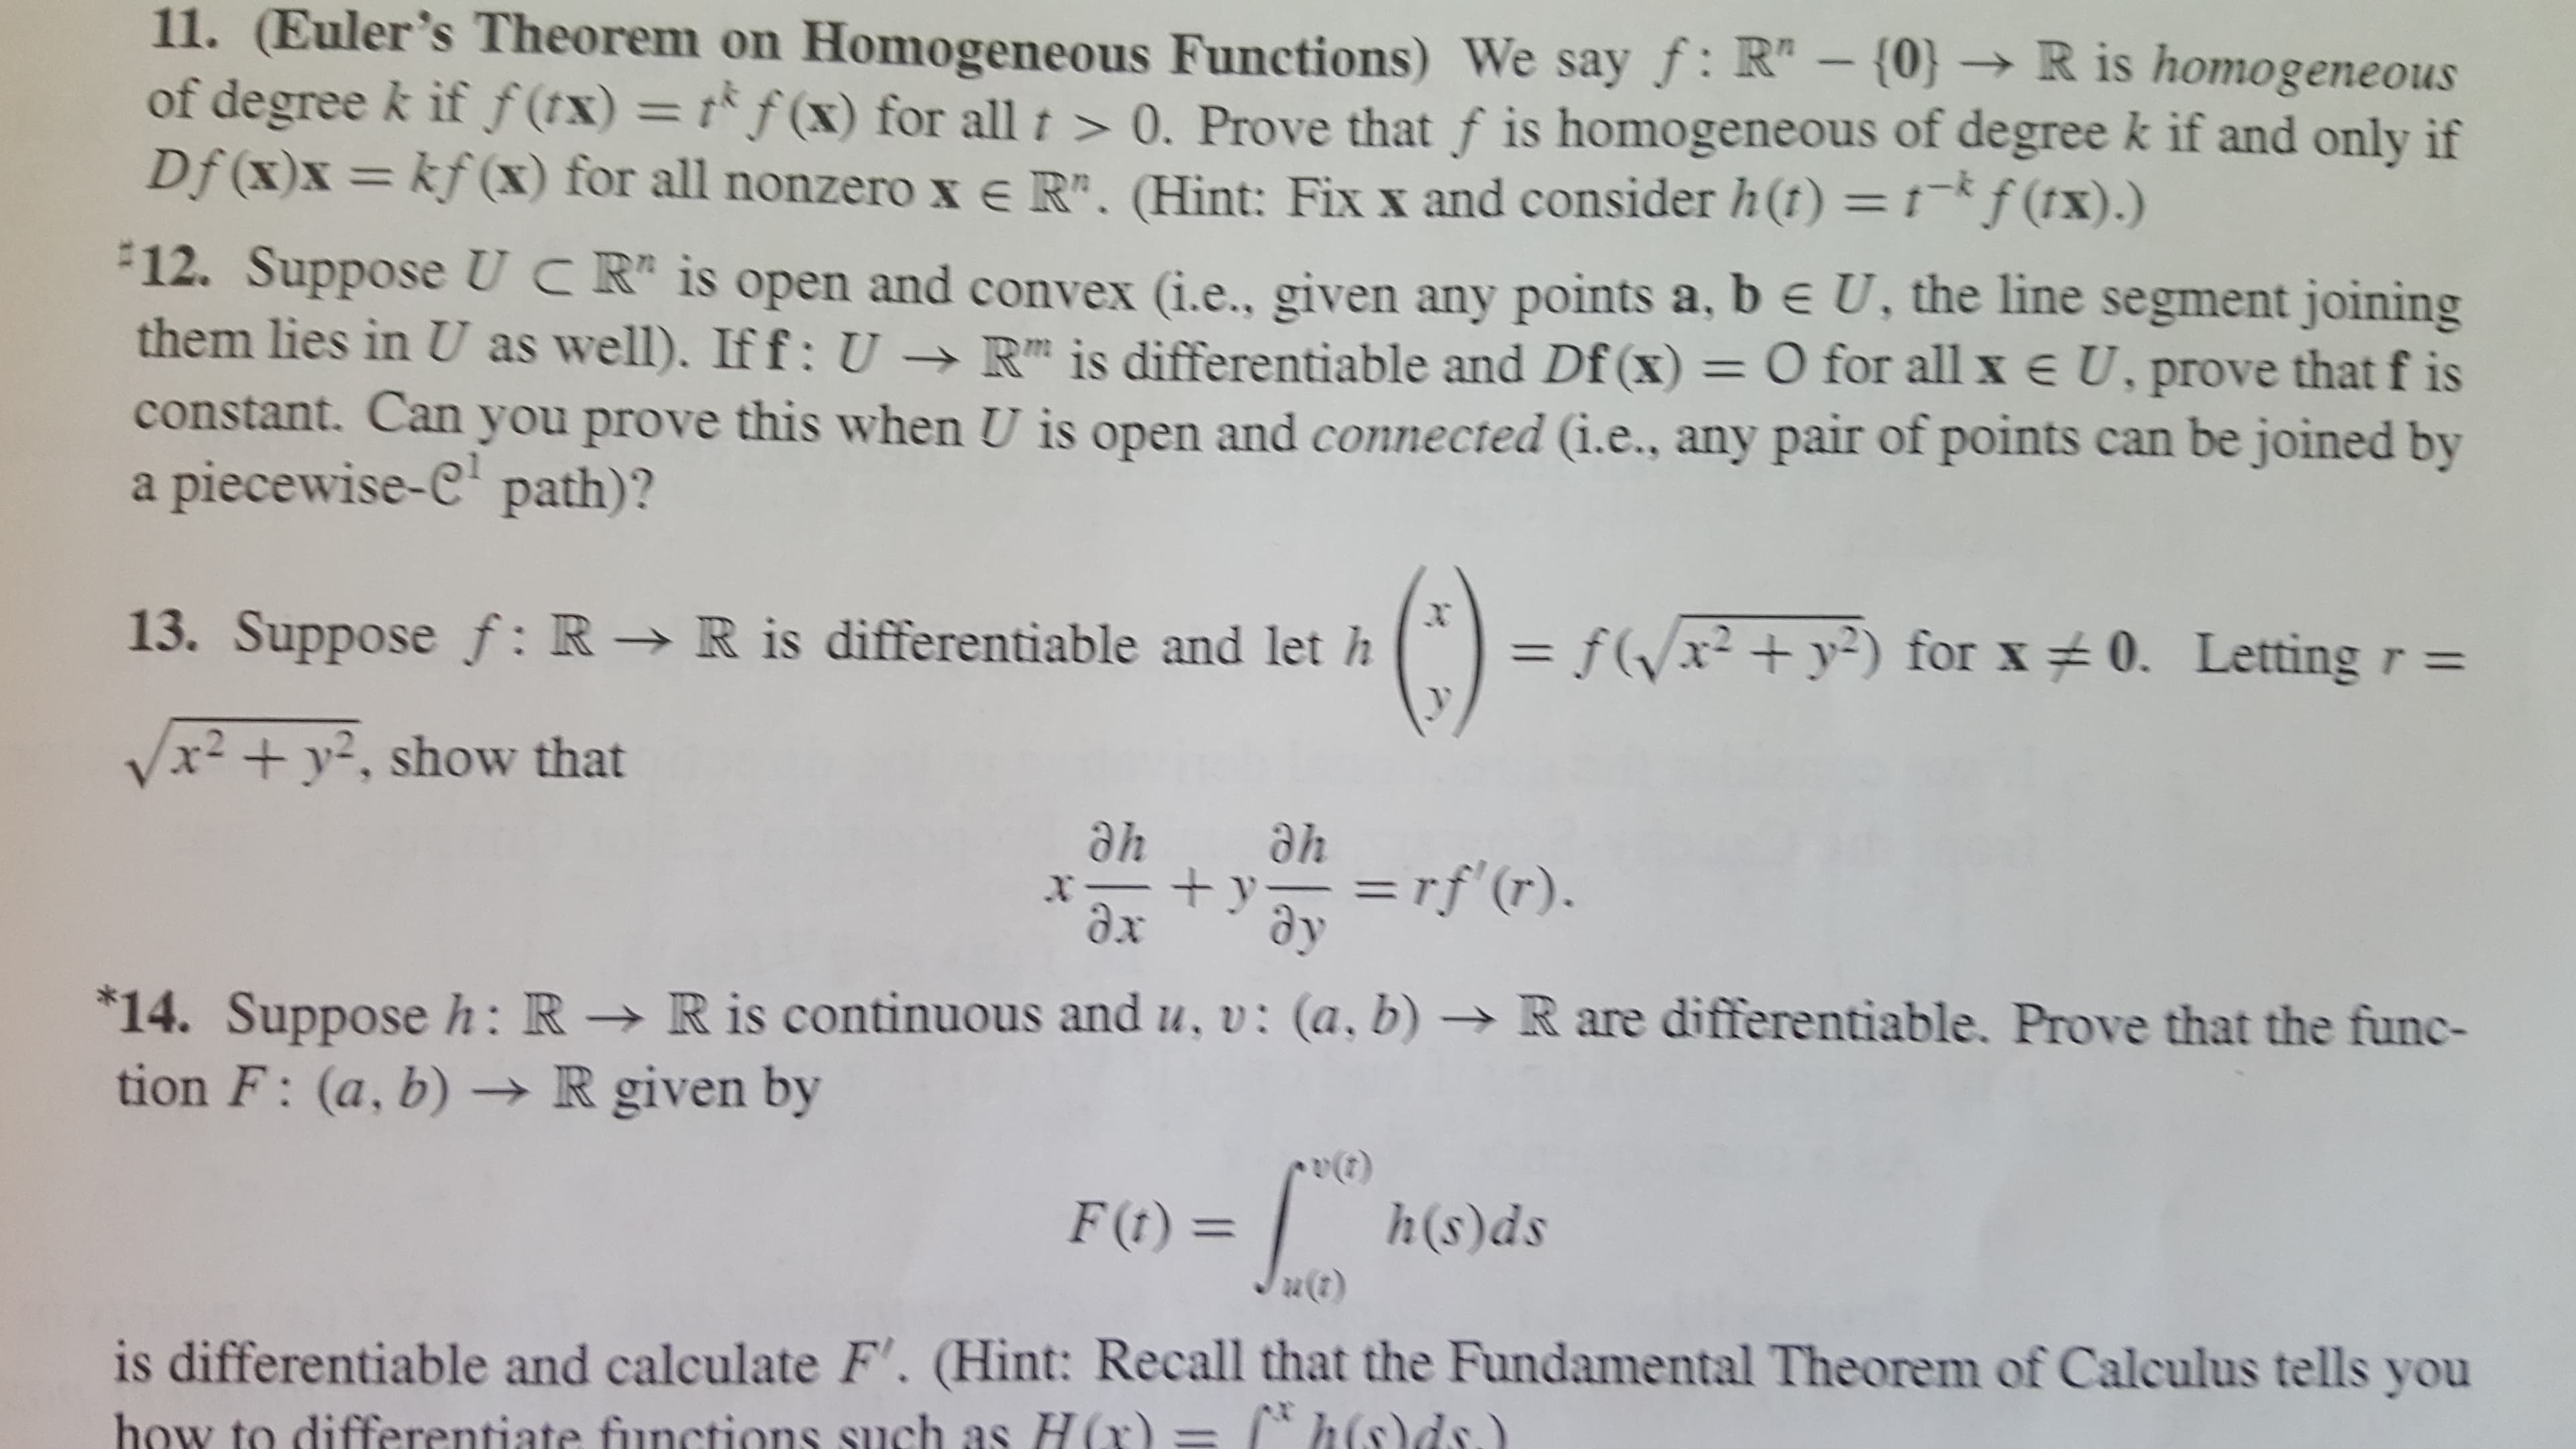 11. (Euler's Theorem on Homogeneous Functions) We say f: R"- {0} R is homogeneous
of degree k if f(tx) = tf(x) for all t >0. Prove that f is homogeneous of degree k if and only if
Df (x)x= kf(x) for all nonzero x e R". (Hint: Fix x and consider h(t) = 1-*f (tx) .)
12. Suppose UCR is open and convex (i.e., given any points a, b e U, the line segment joining
them lies in U as well). If f: U -R is differentiable and Df (x) = O for all x e U, prove that f is
constant. Can you prove this when U is open and connected (i.e., any pair of points can be joined by
piecewise-C path)?
a
13. Suppose f: R > R is differentiable and let h
fxy2) for x 0. Letting r =
/x2 +y2, show that
ahe
he
=rf(r).
x
dx
14. Suppose h: R - R is continuous and u, v: (a, b)
tion F: (a, b) -R given by
R are differentiable. Prove that the func-
h(s)ds
F(t)=
is differentiable and calculate F'. (Hint: Recall that the Fundamental Theorem of Calculus tells you
how to differentiate functions such as H (r) =
2
